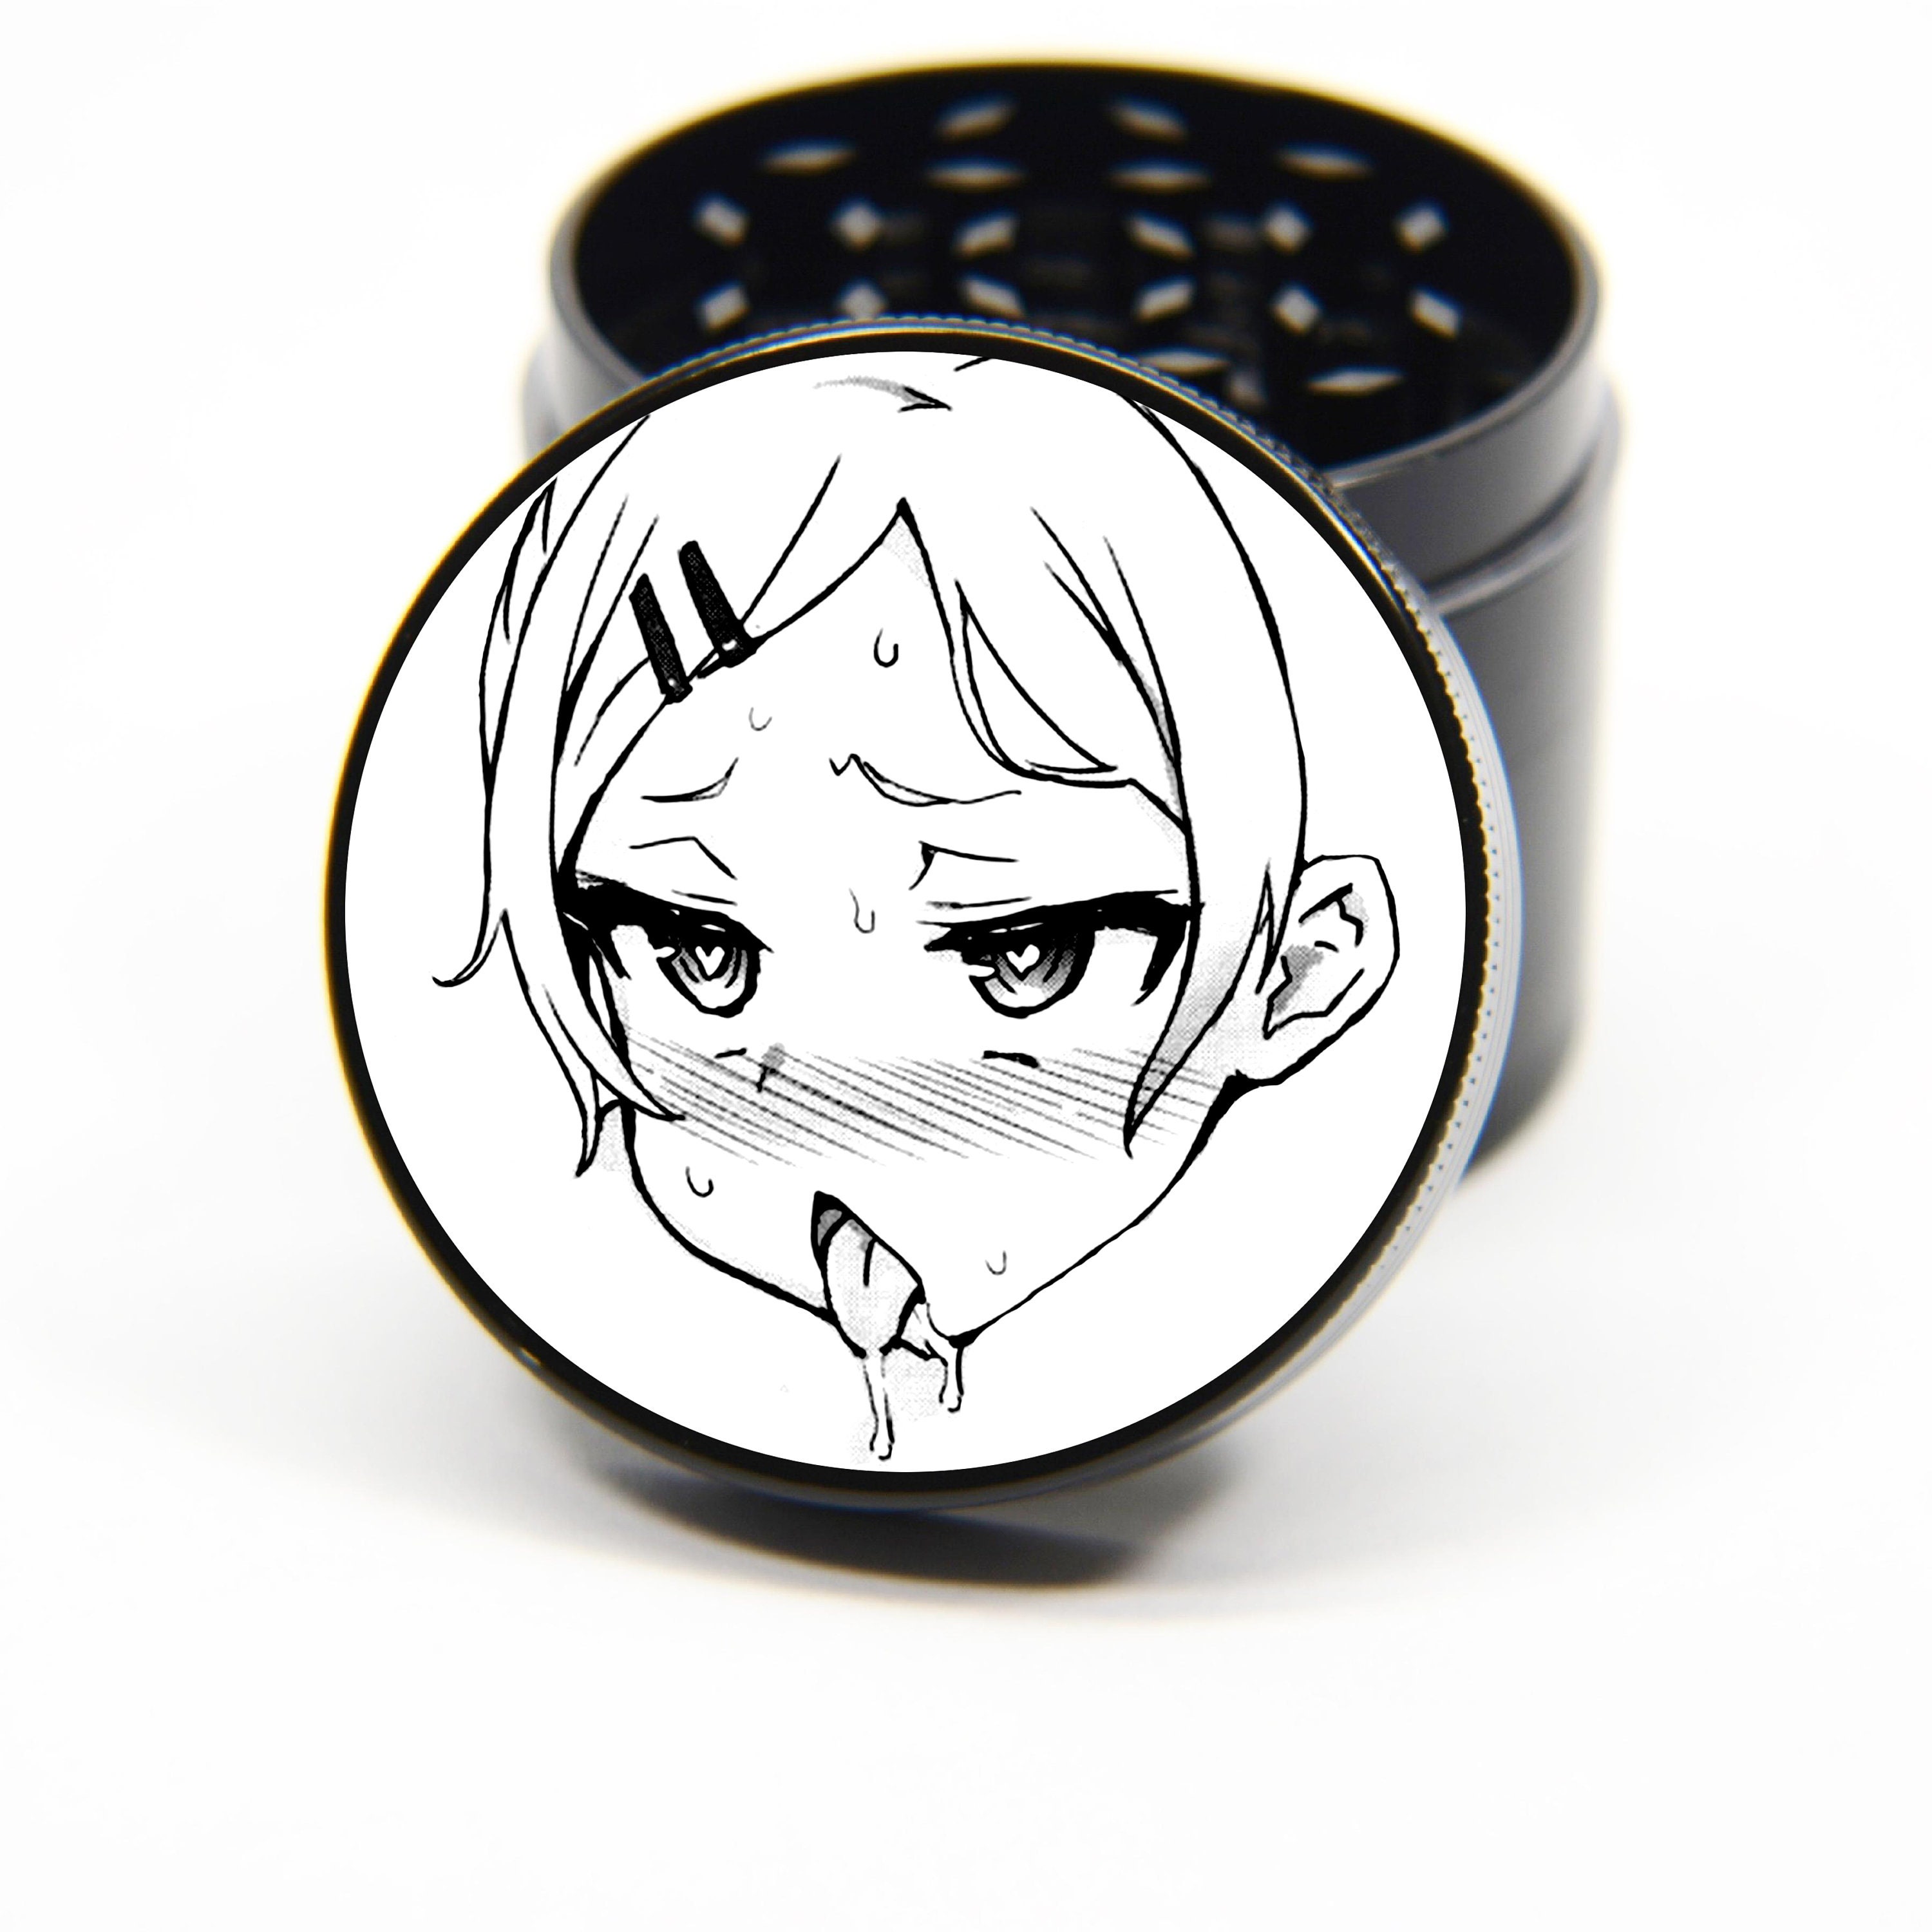 Sexy Anime Ahegao Face Girl Japanese Style Art Laser Engraved Aluminum Herb  Grinder 429 - Etsy